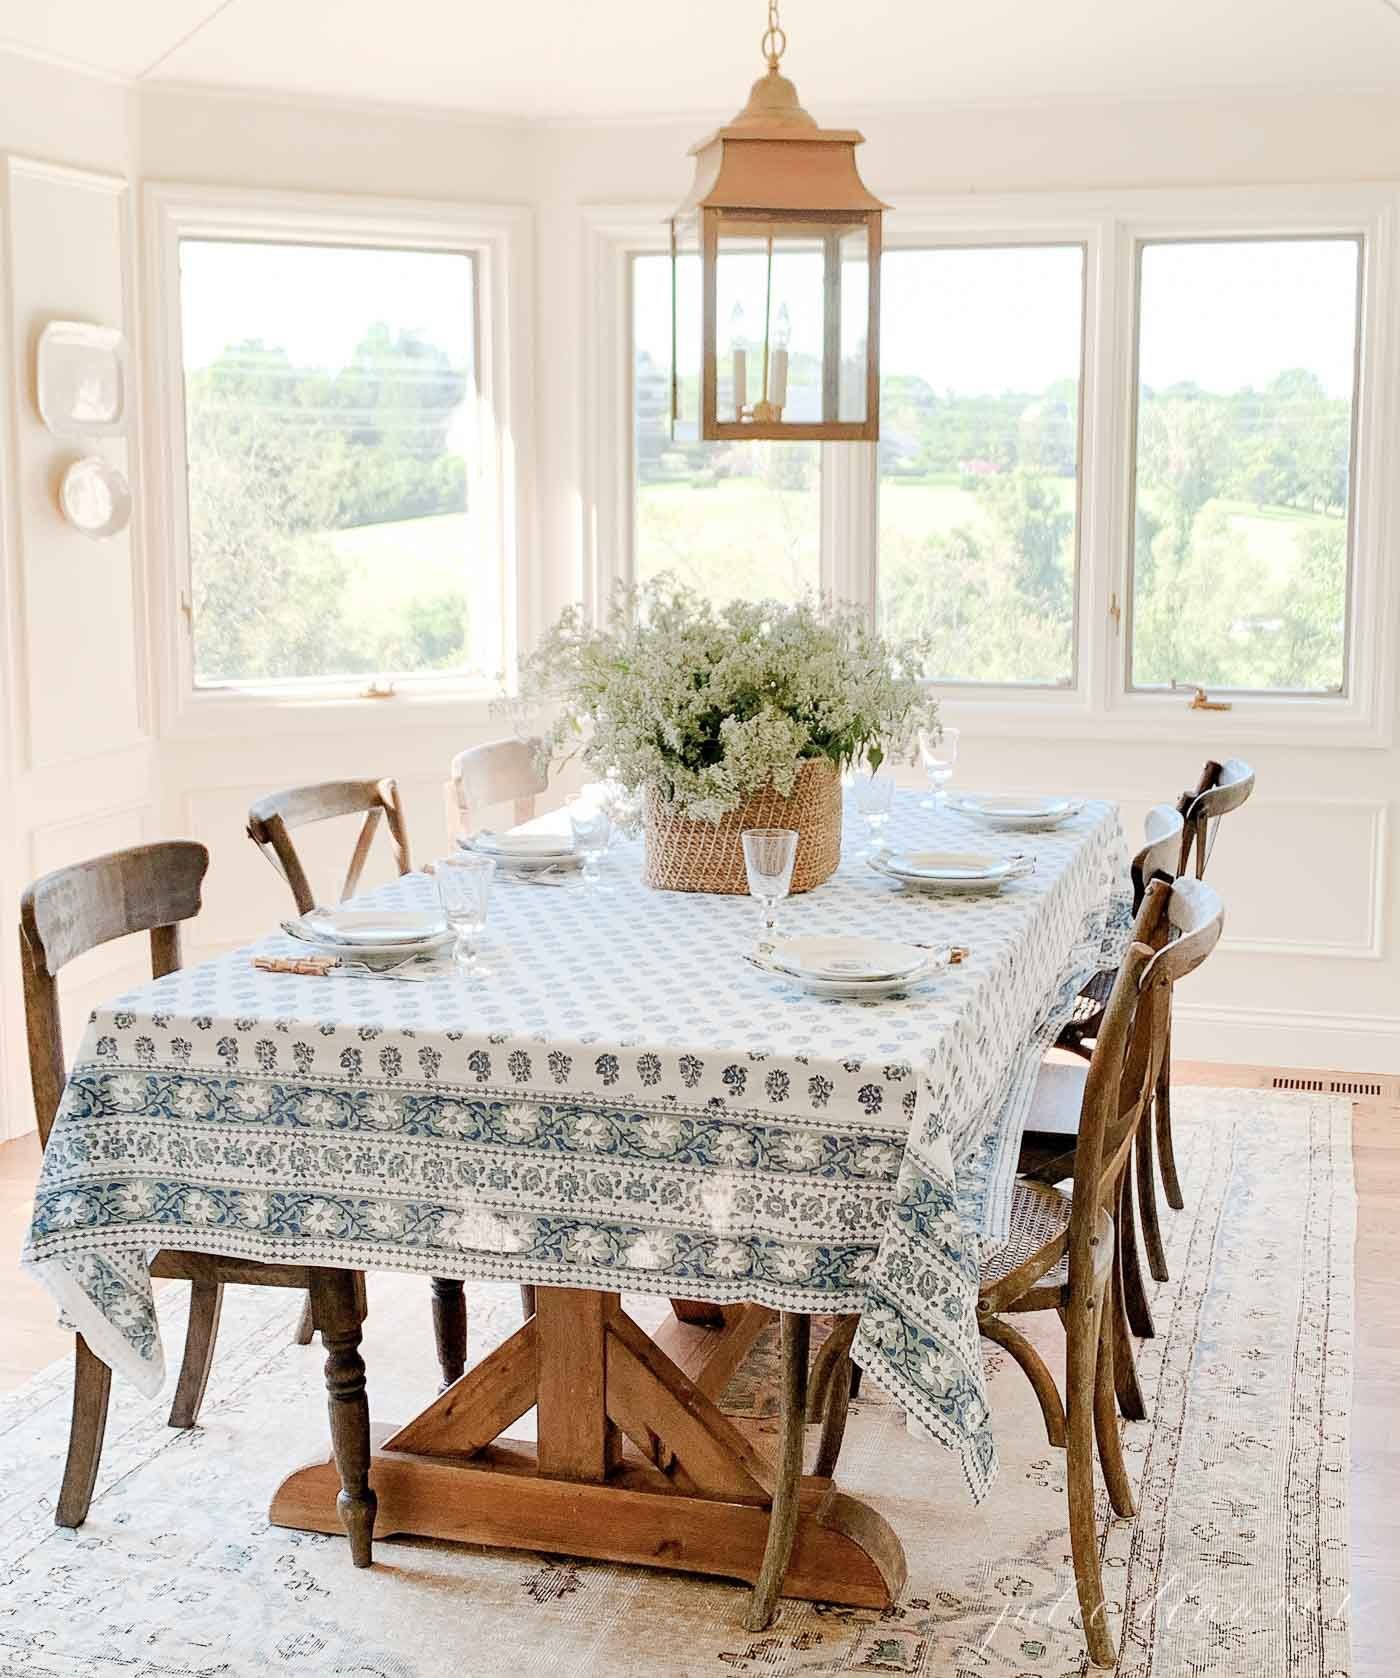 A dining room table with a vintage rug underneath